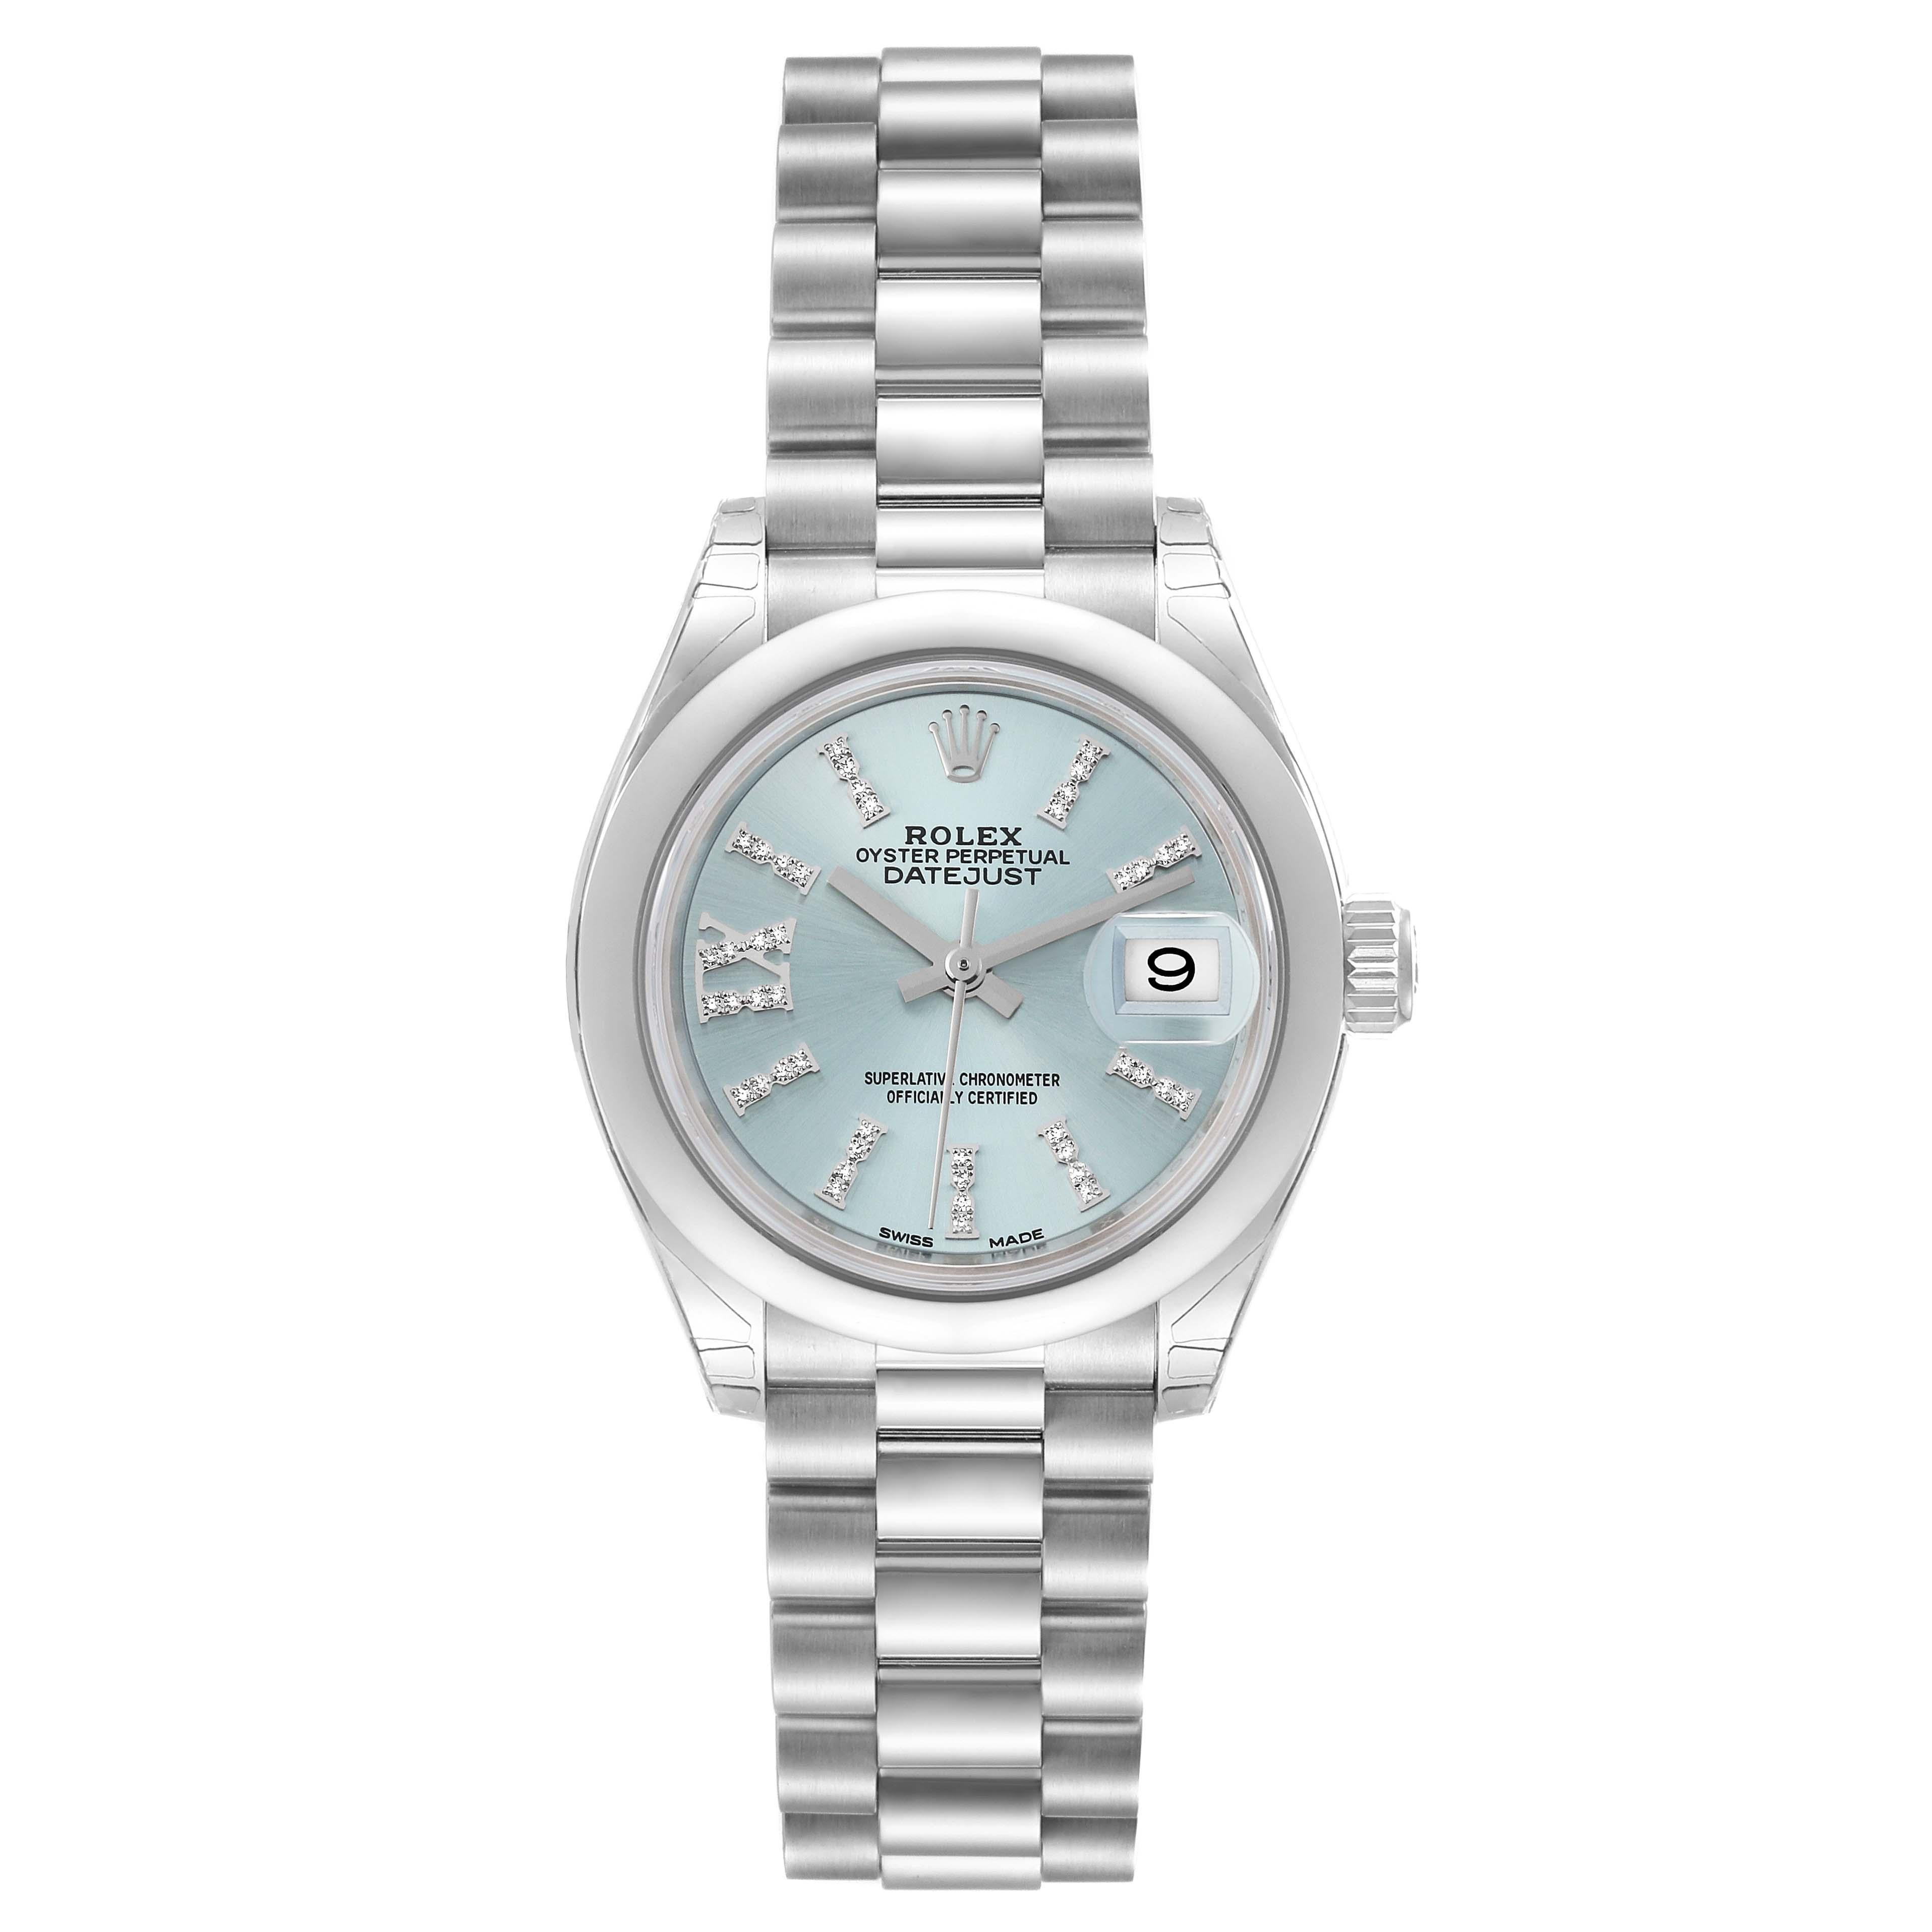 Rolex President Blue Diamond Dial Platinum Ladies Watch 279166 Unworn. Officially certified chronometer self-winding movement with quickset date function. Platinum oyster case 28.0 mm in diameter. Rolex logo on the crown. Smooth domed platinum